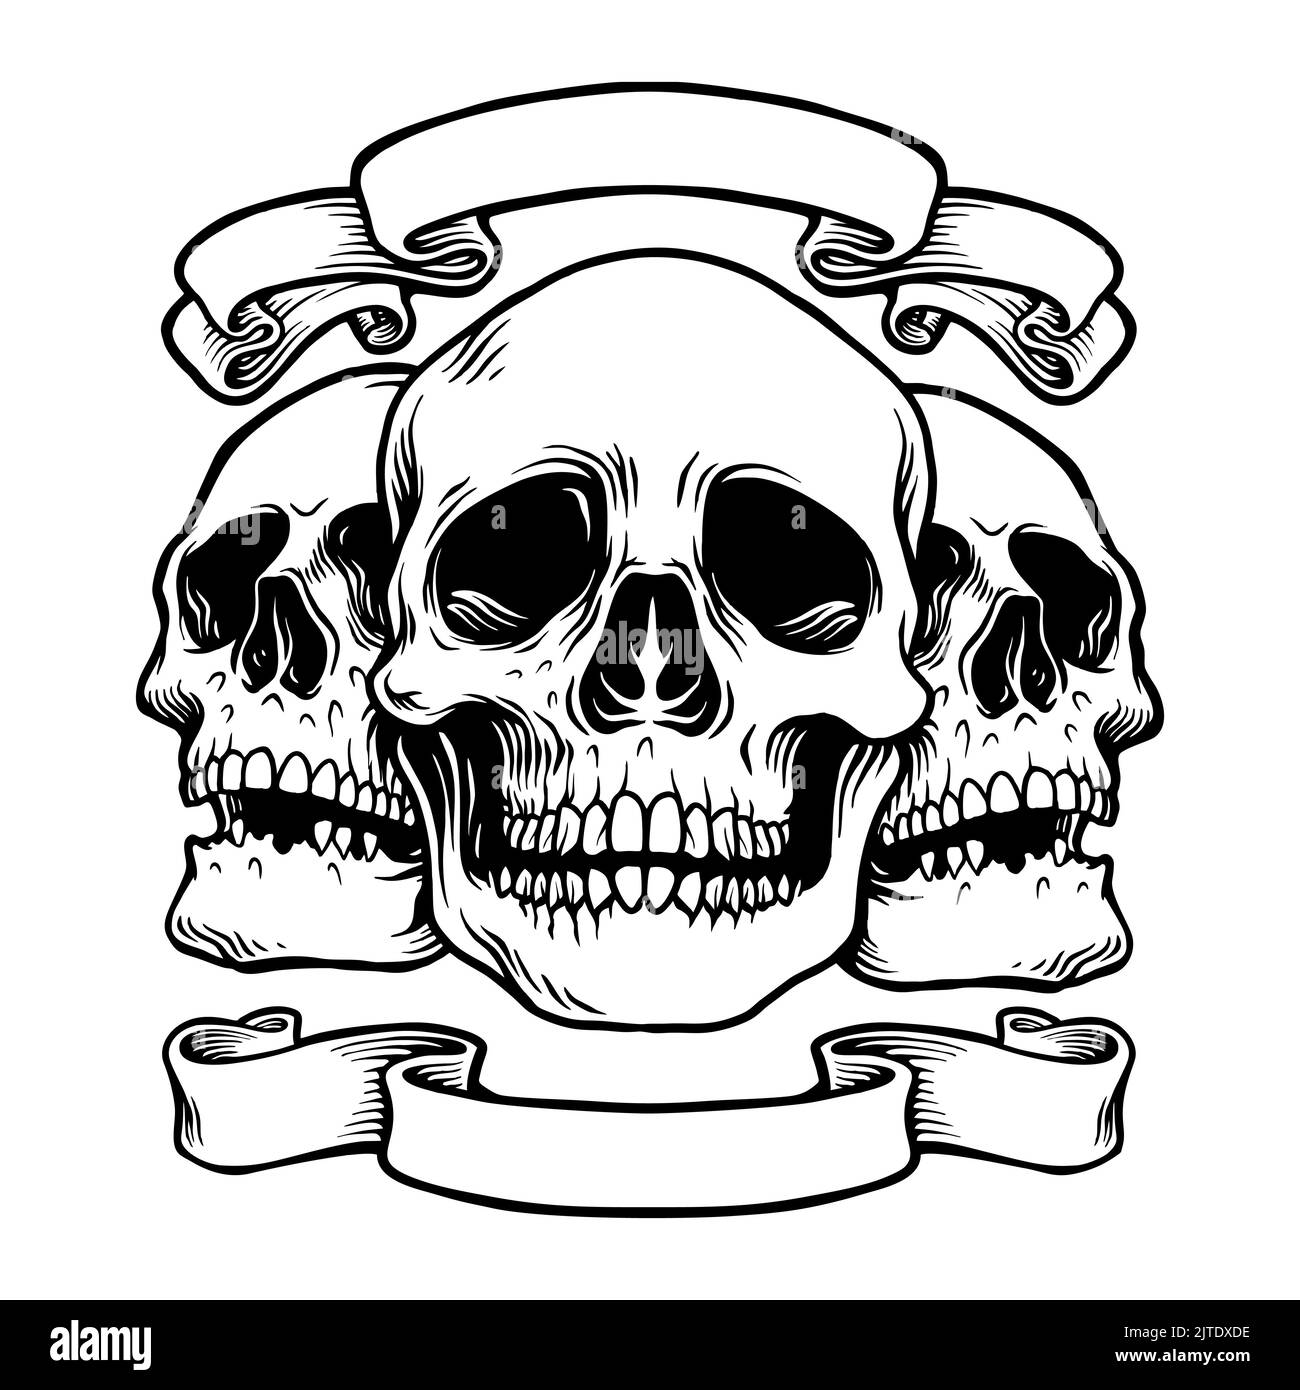 Brotherhood Skull Ribbon Silhouette Vector illustrations for your work Logo, mascot merchandise t-shirt, stickers and Label designs, poster, greeting Stock Photo